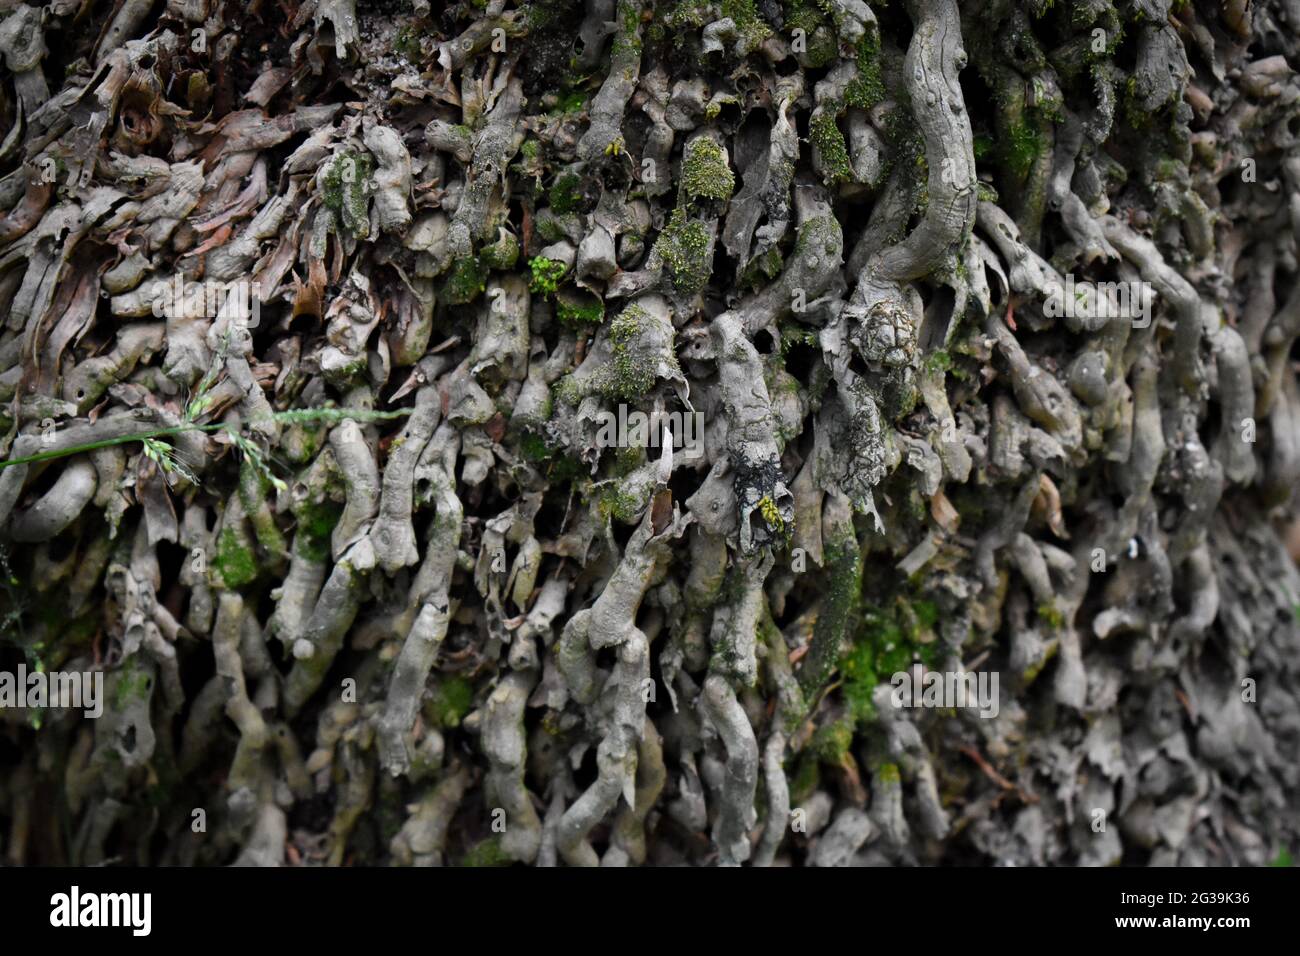 Closeup shot of the roots of a coconut tree Stock Photo